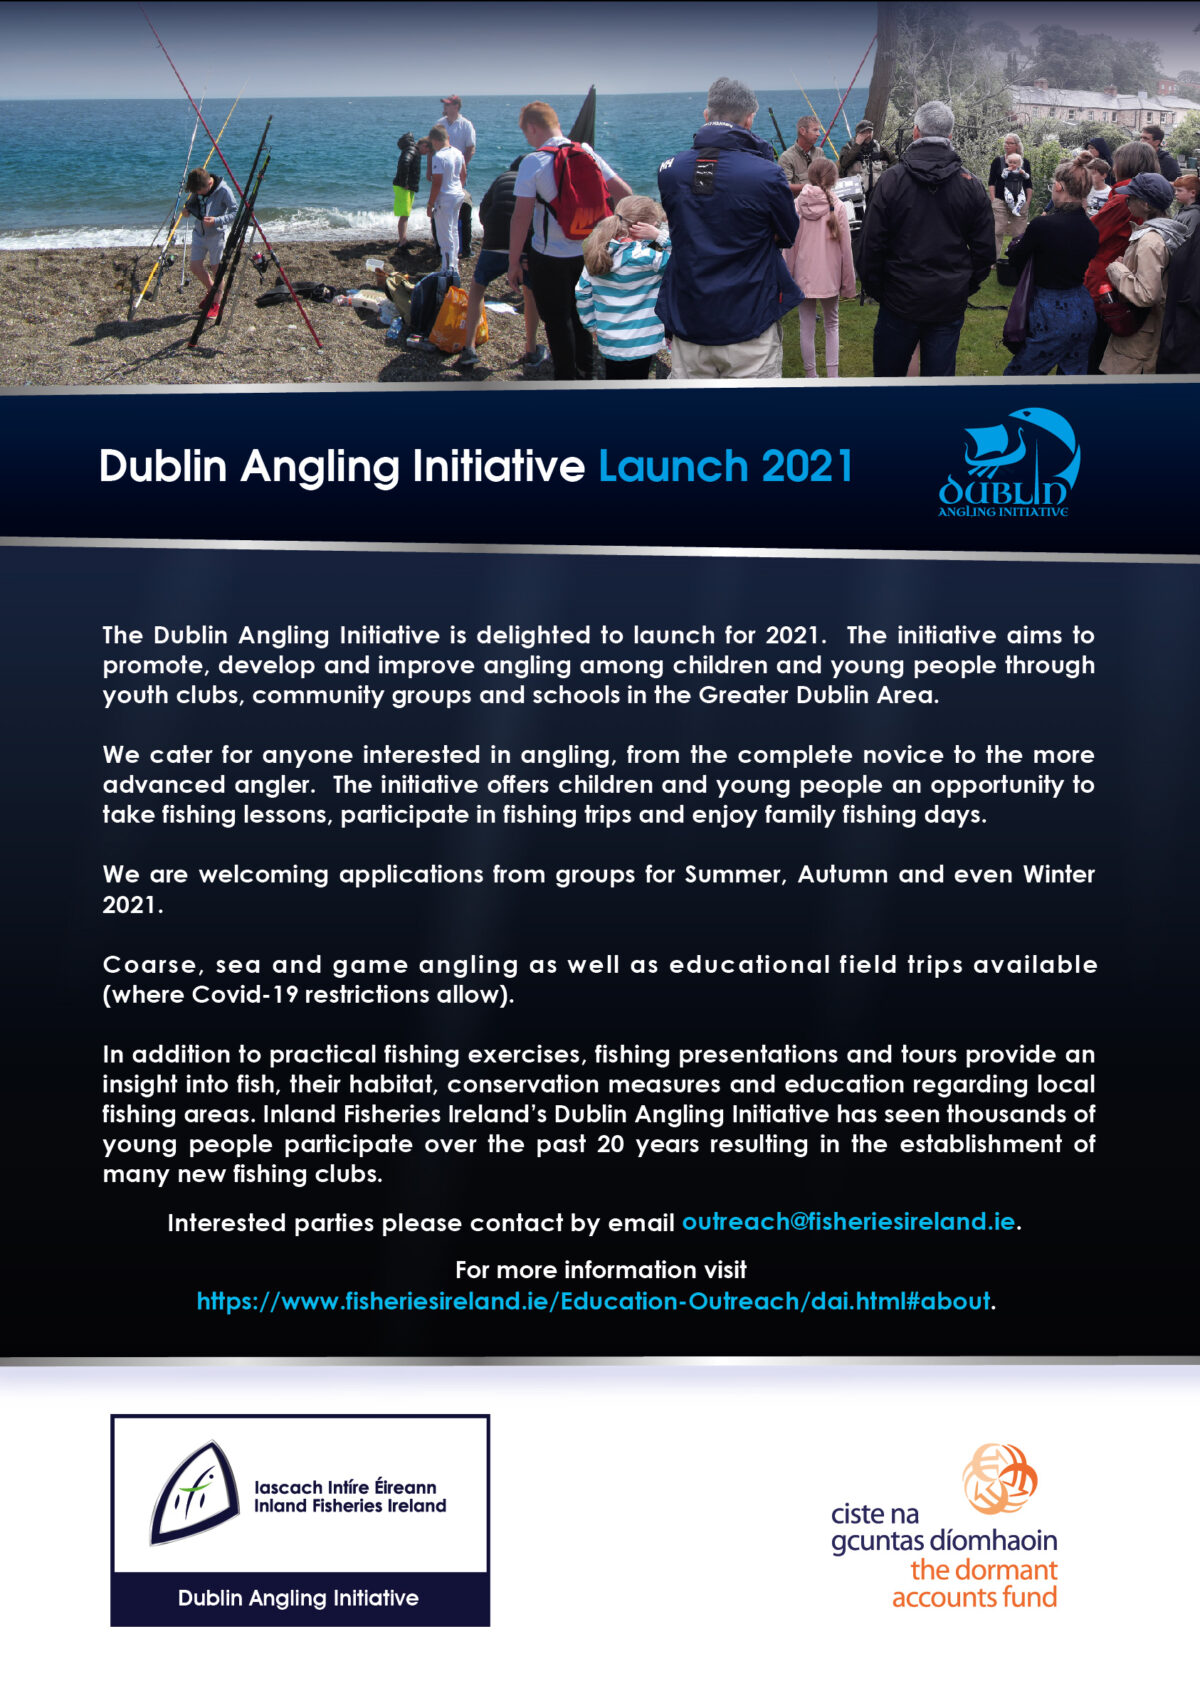 Call for Youths to learn fishing with the Dublin Angling Initiative